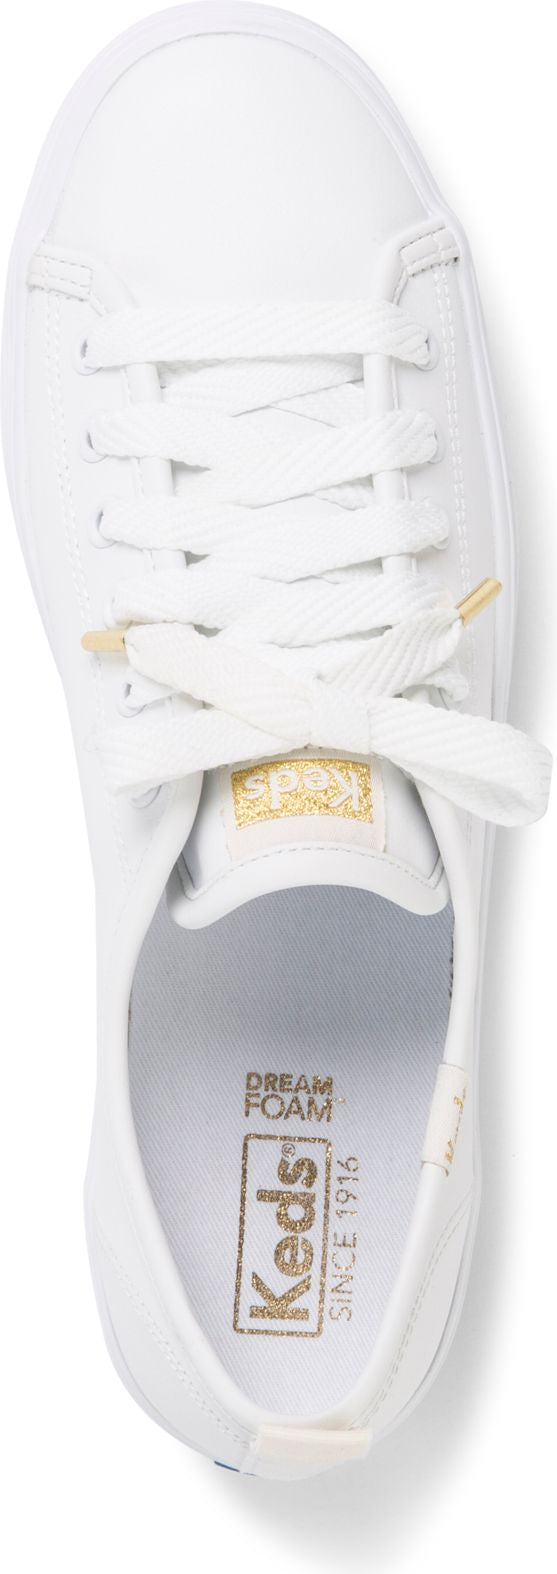 Keds Shoes Triple Up Leather White